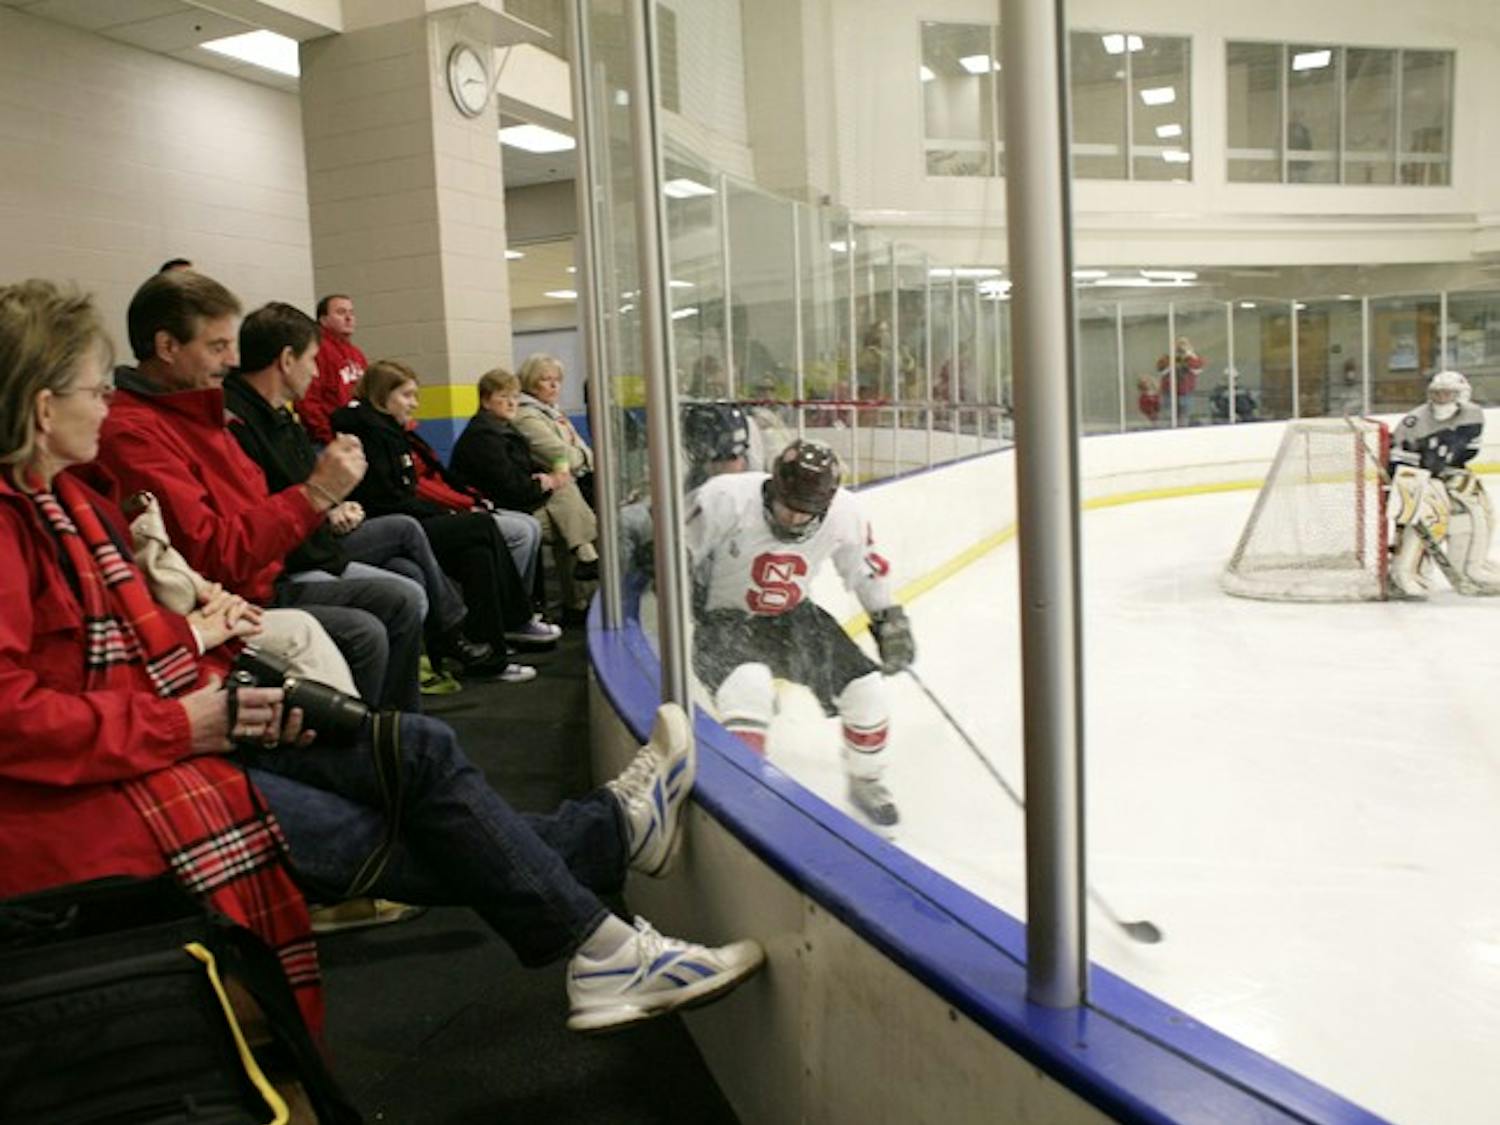 A small crowd gathered to watch the Georgetown v. NC State hockey game at the ACC Hockey Tournament at the Triangle Sportsplex in Hillsborough on Saturday. The tournament, which ran from Friday to Sunday, drew between 150 and 200 spectators on Friday night, according to Diane Thompson, mother of senior defensman John Thompson, who worked the door at many of the games this weekend. The tournament featured spirited competition from the athletes, regardless of the attendance. "They're playing for the name on the front of their jersey," said Thompson. "They're playing for pride."